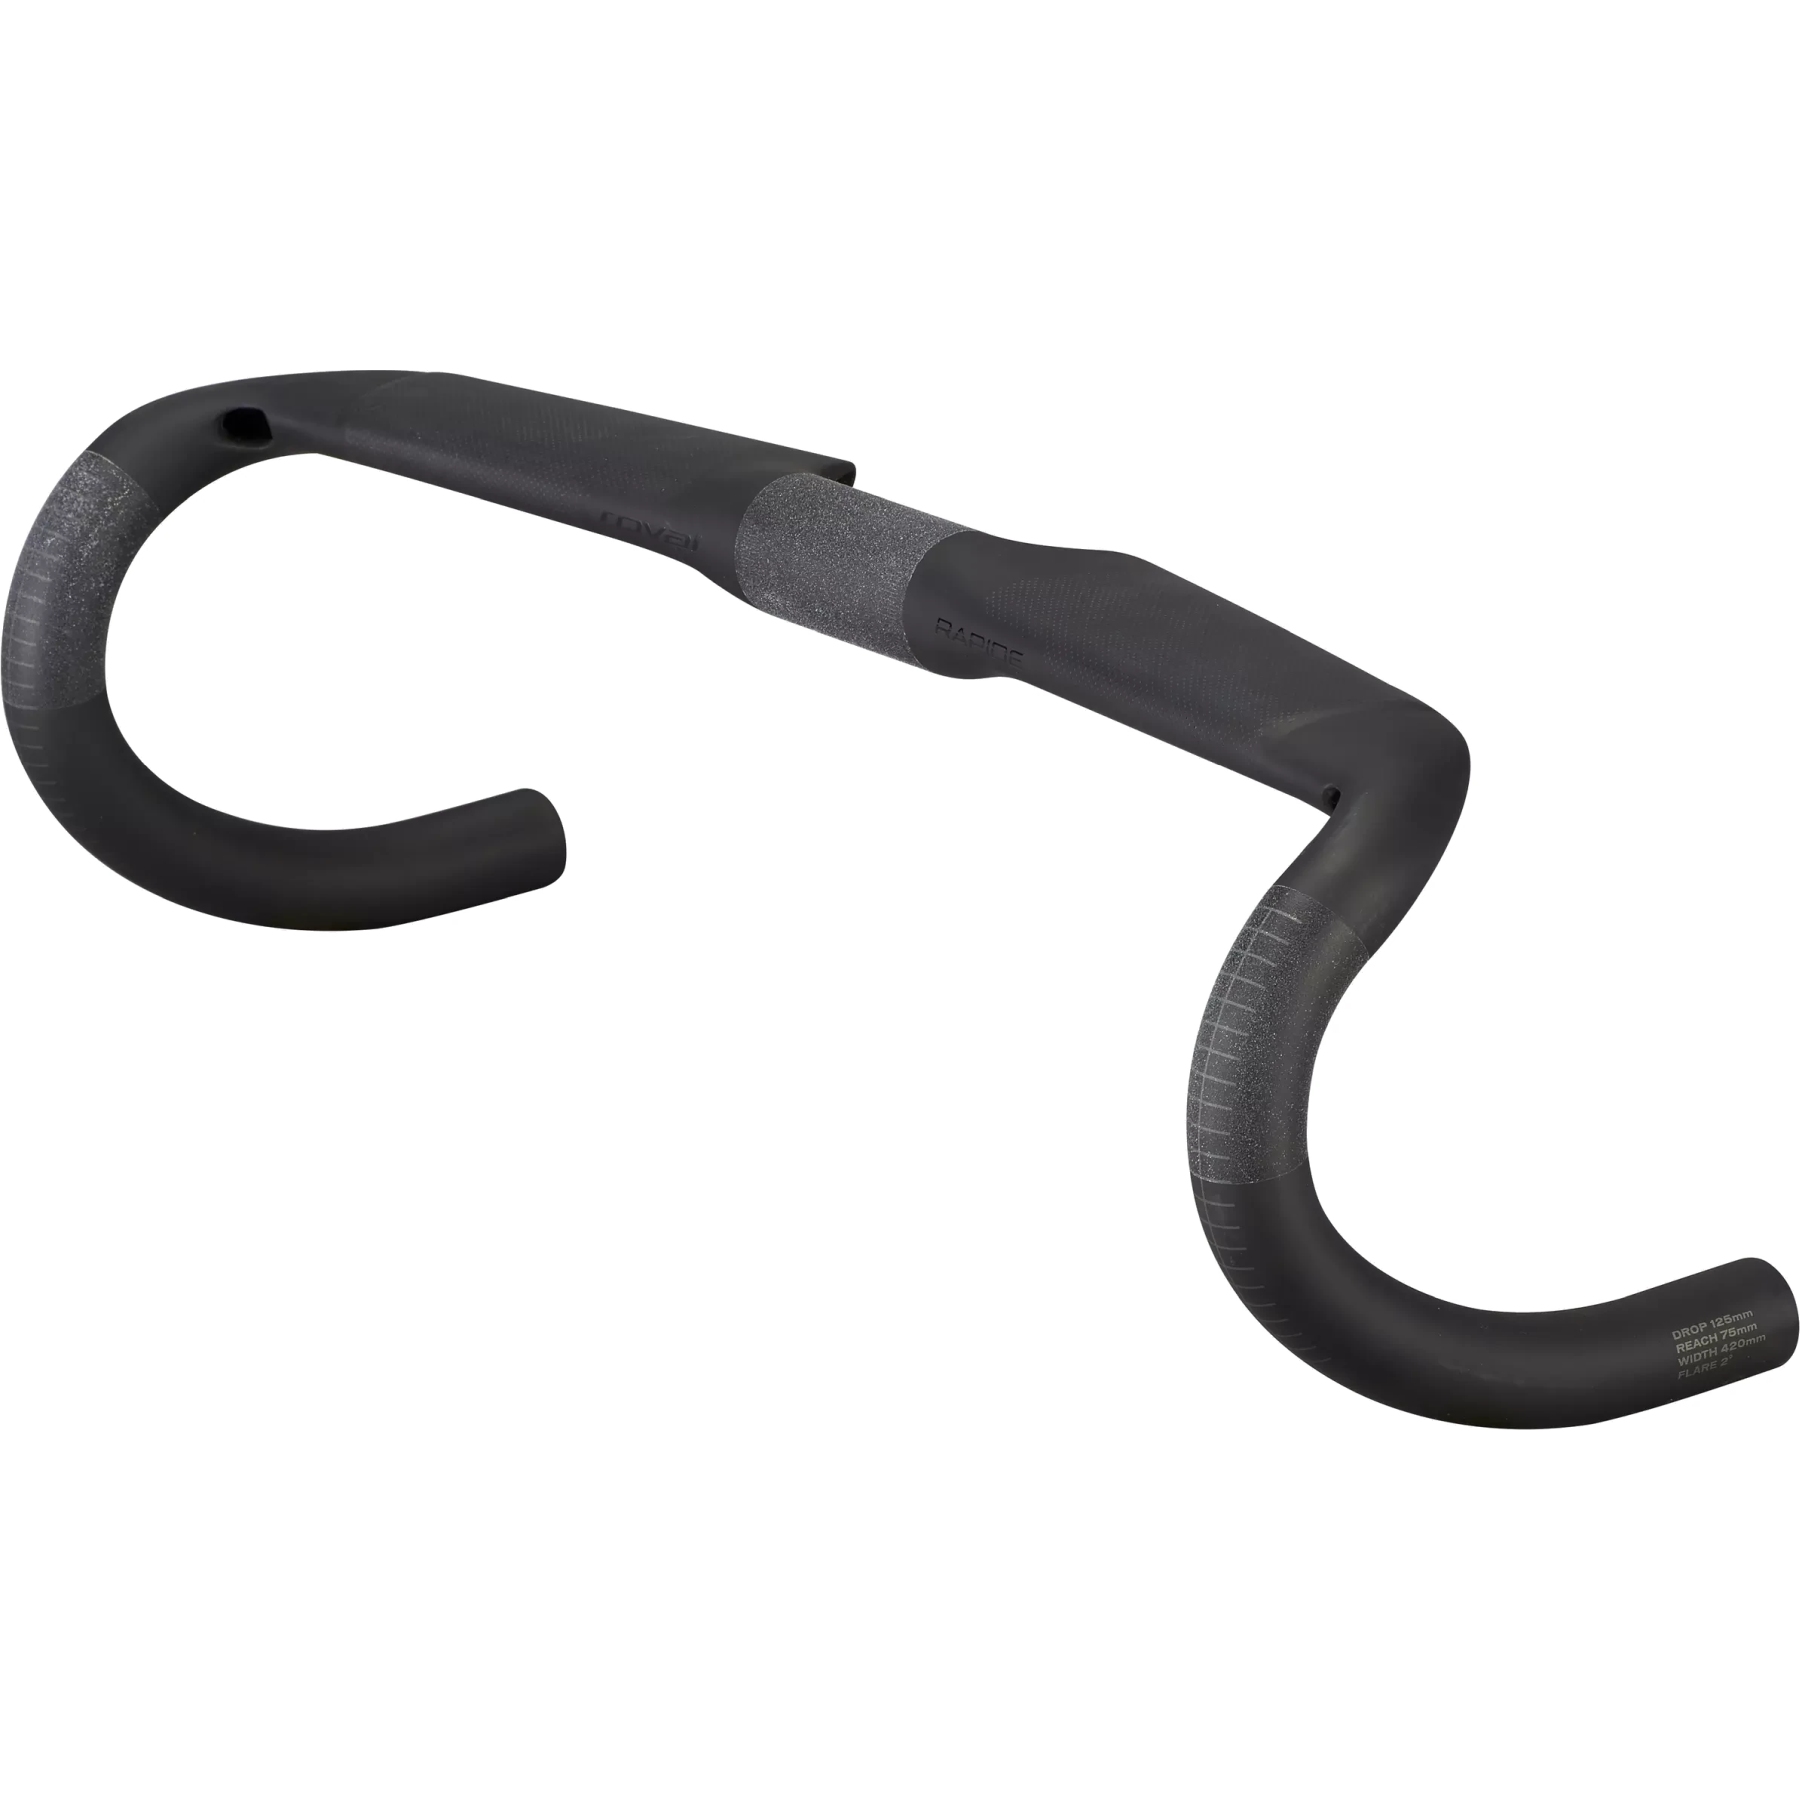 Picture of Specialized Roval Rapide Road Handlebar 31.8 - Black/Charcoal